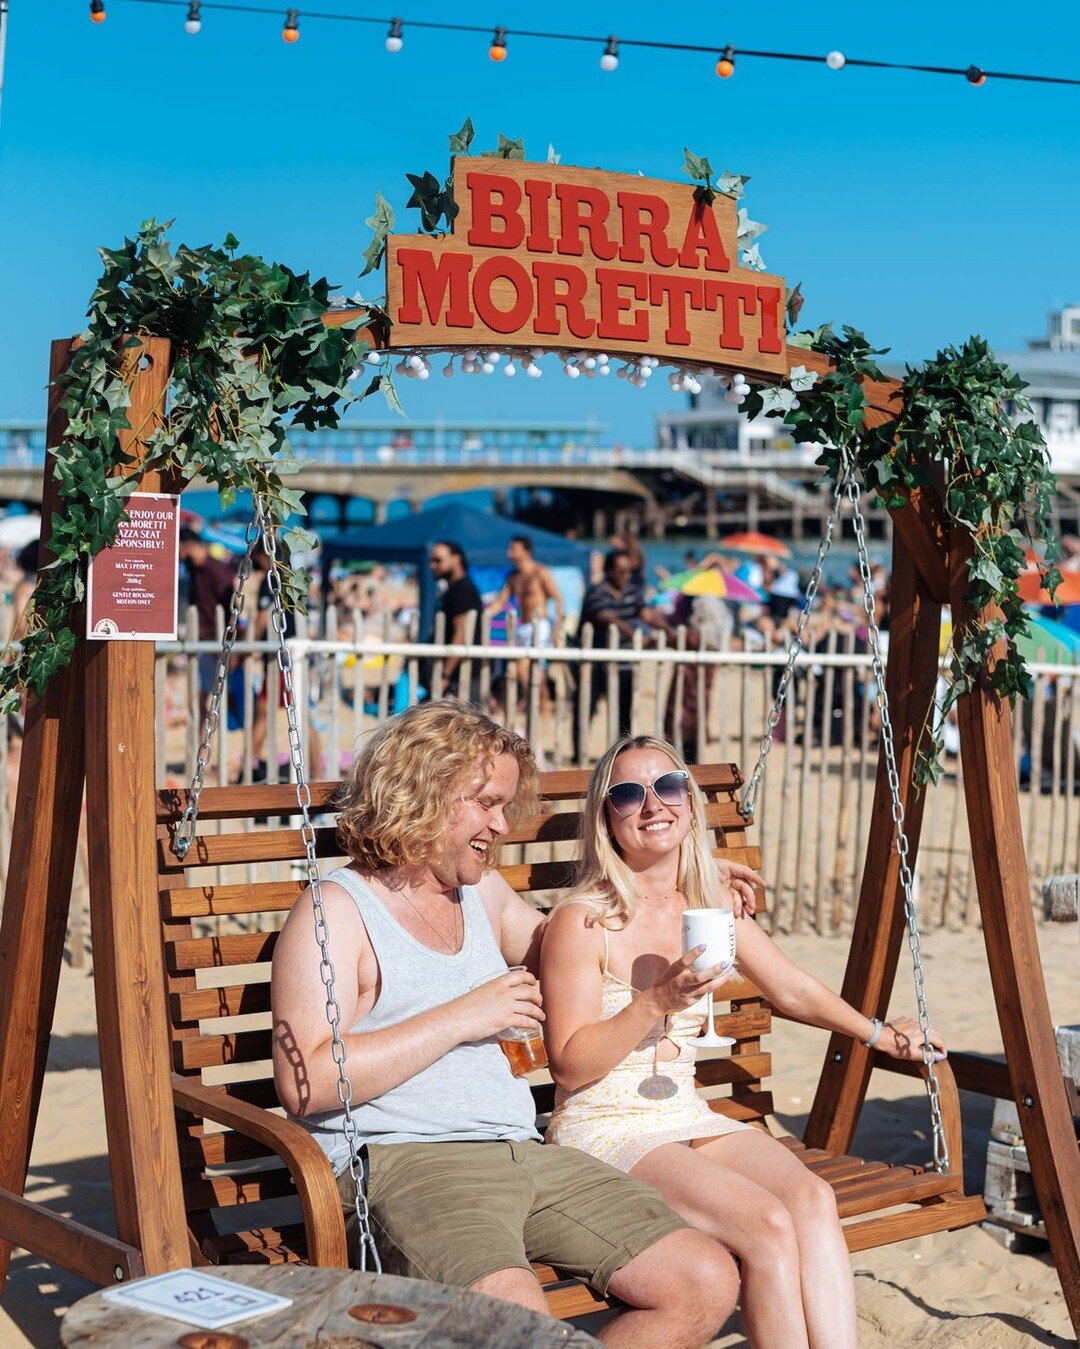 It's set to be another scorcher today! So what better way to soak up the sun than on our deck ☀️☀️☀️
.
.
No bookings, walk in's welcome 🍹
See you there! 
#wbeachbournemouth #beachday #summer